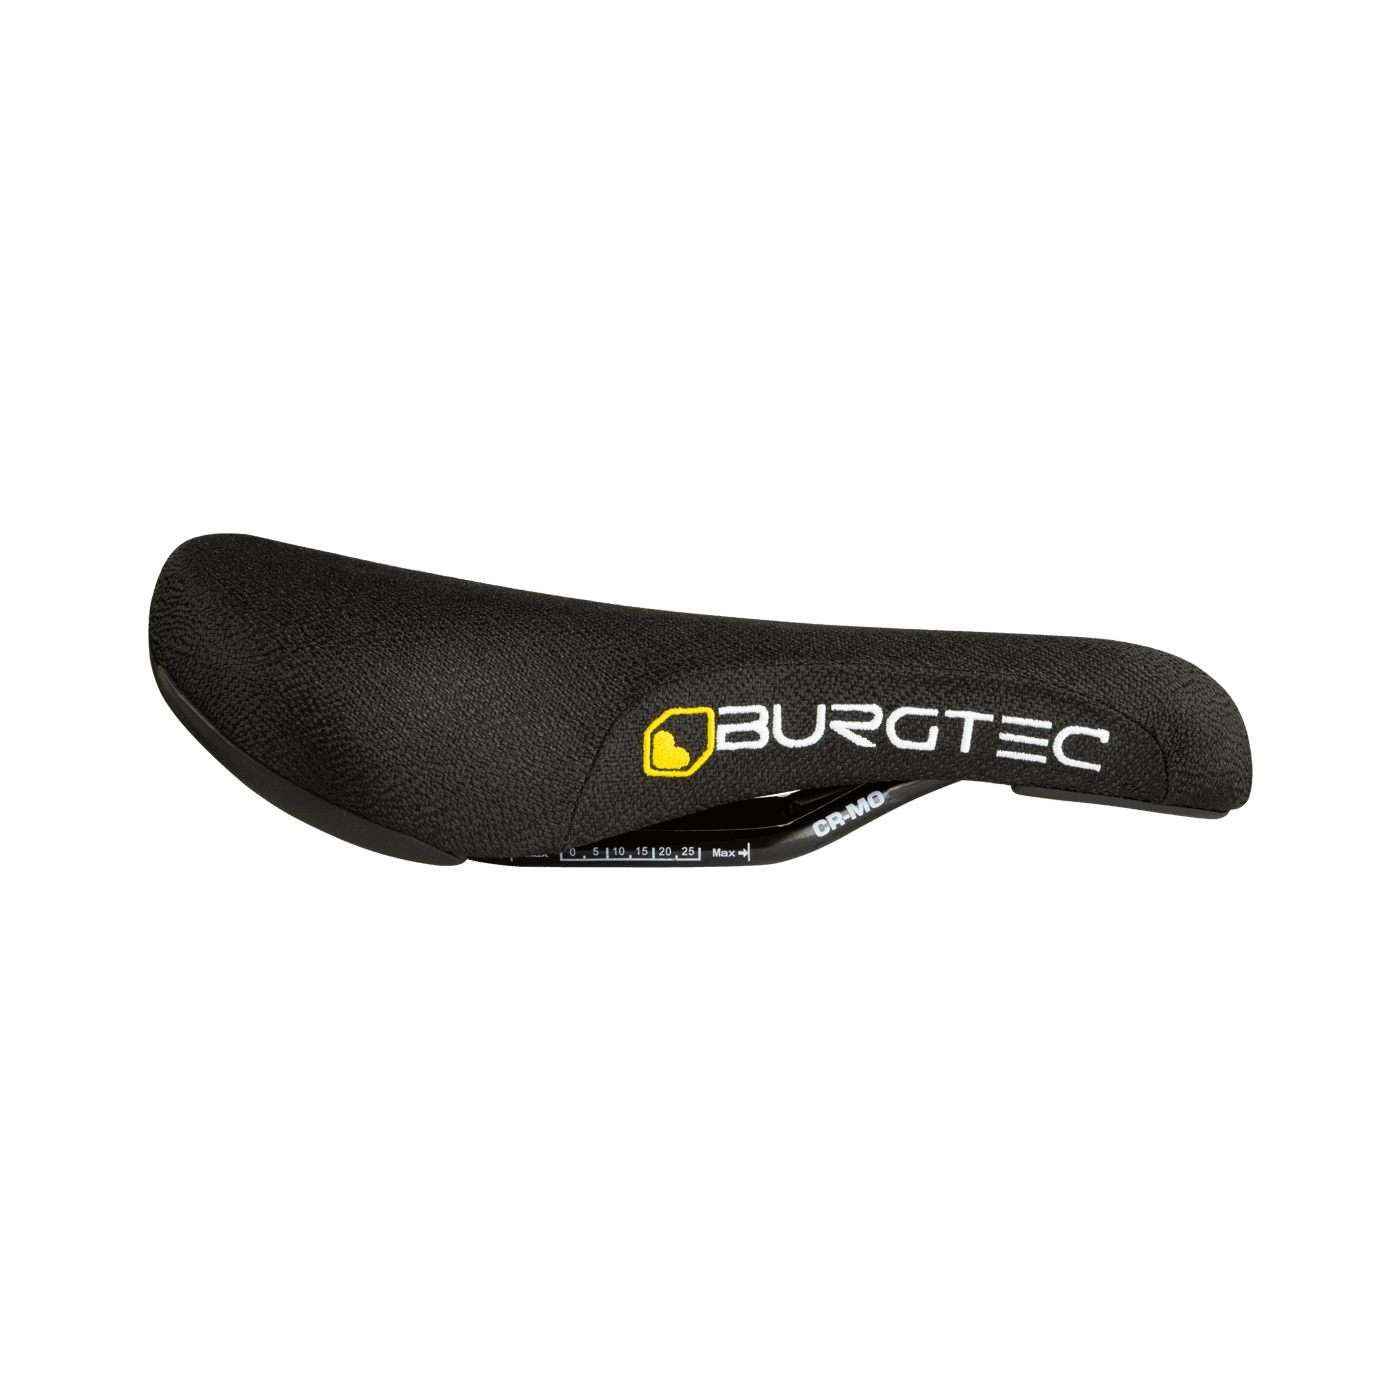 Burgtec the cloud Boost saddle with white logo on the side